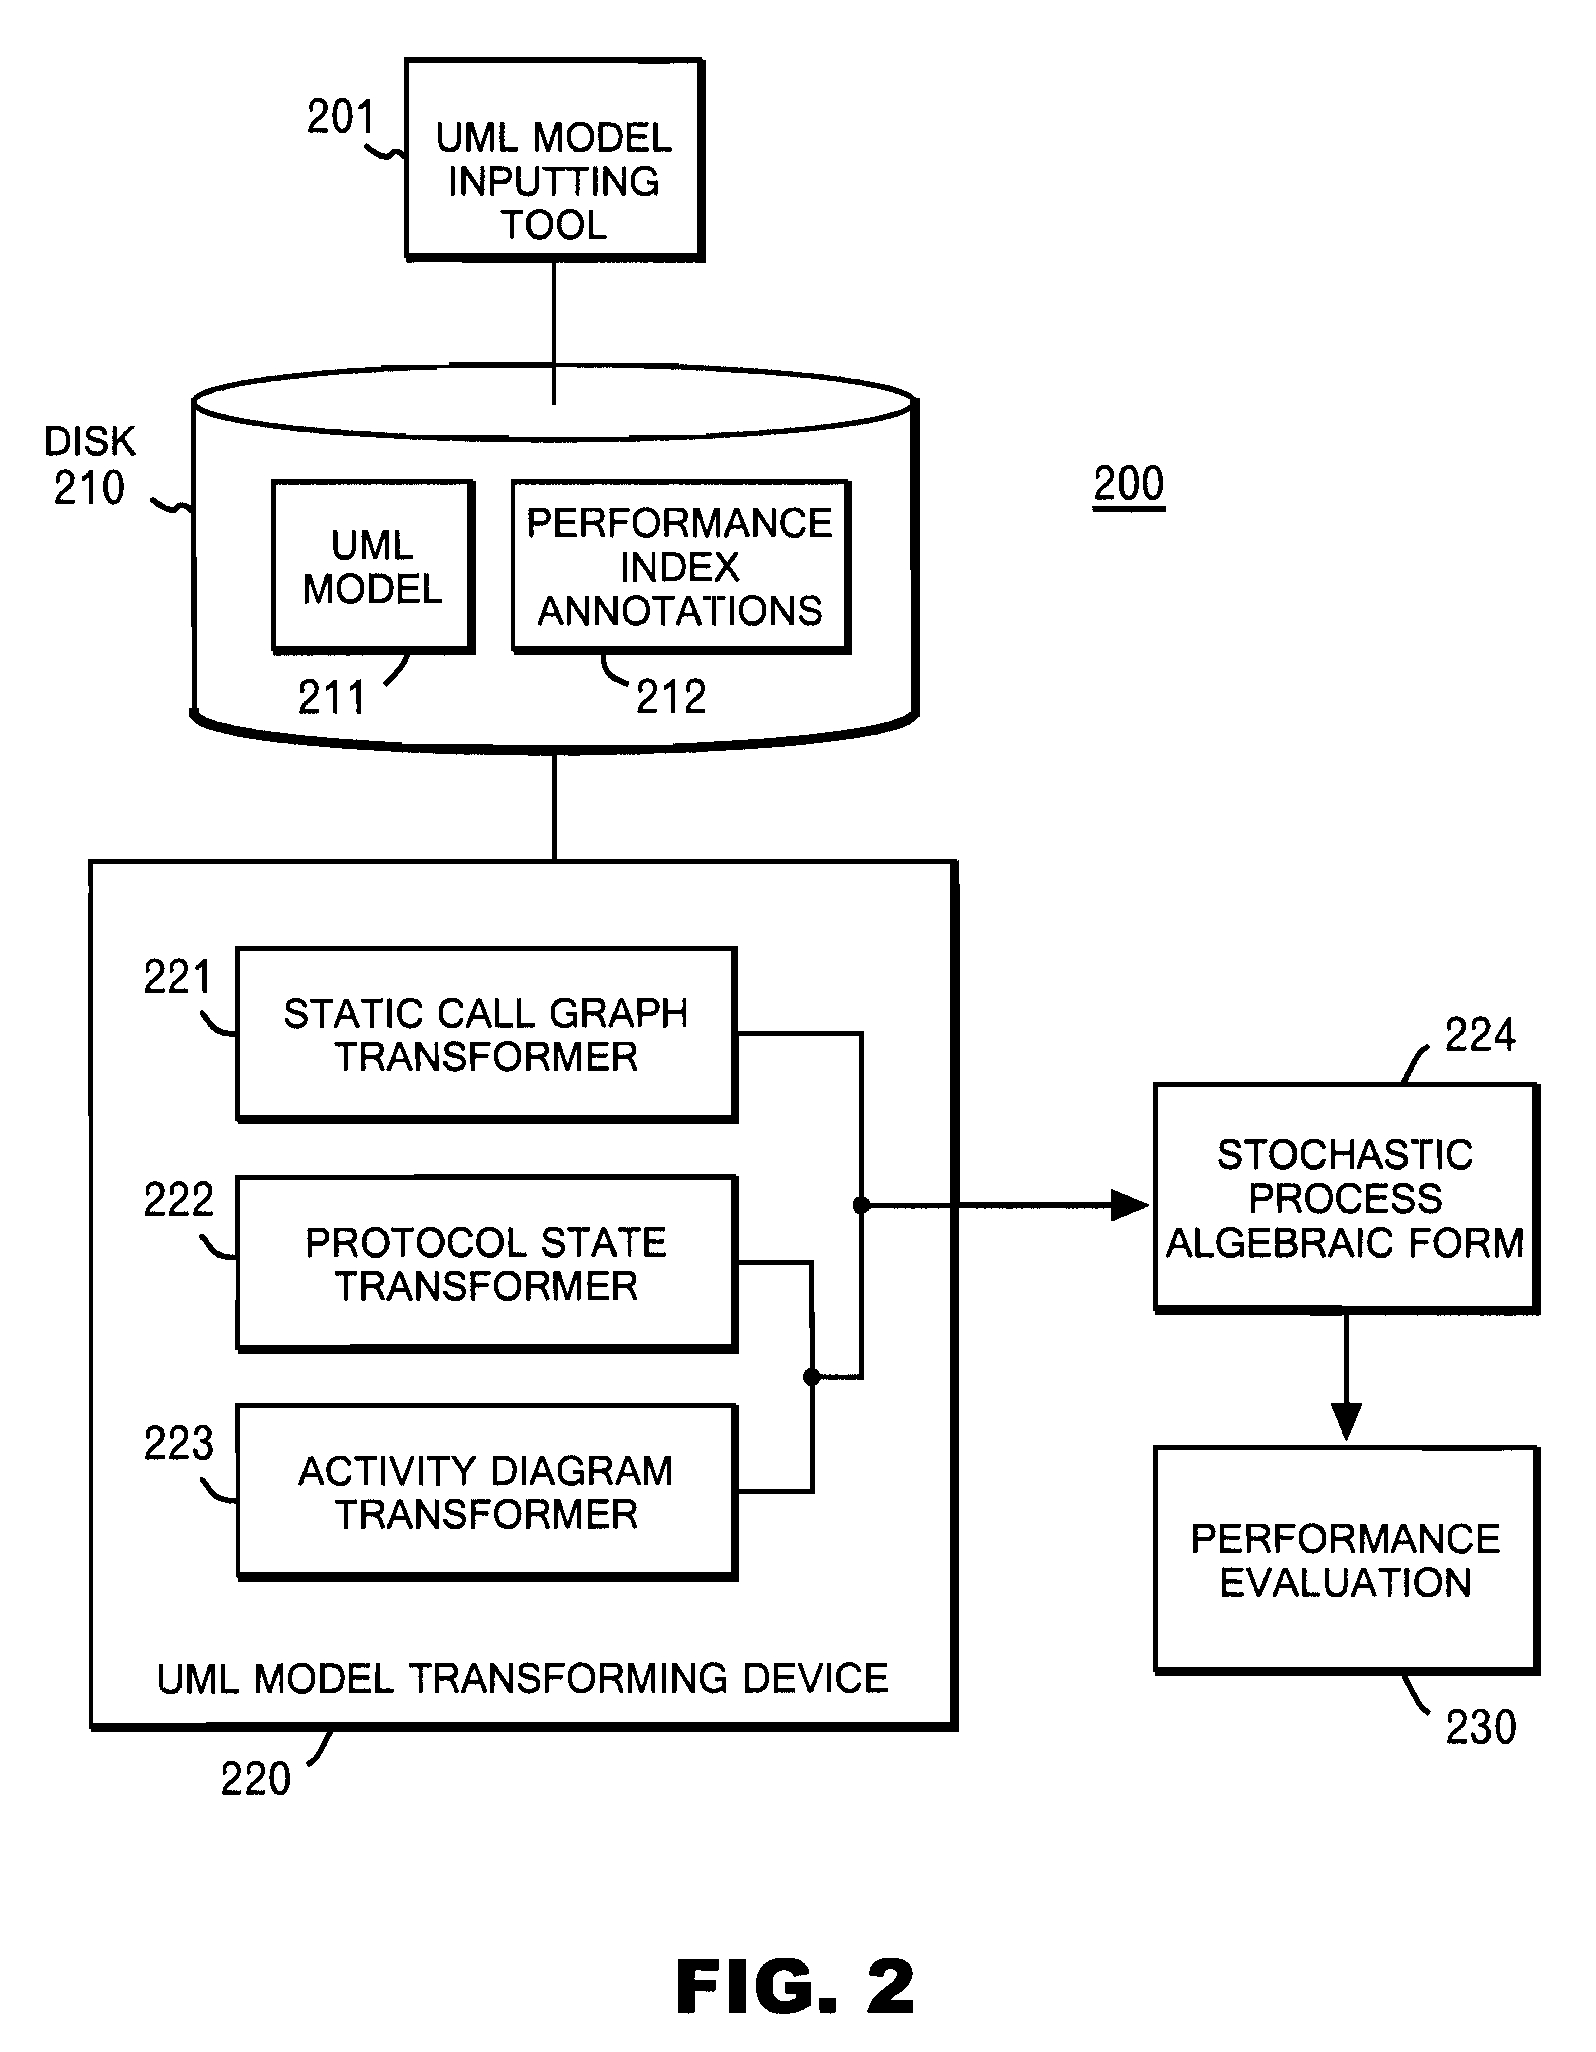 System and method for deriving stochastic performance evaluation model from annotated UML design model